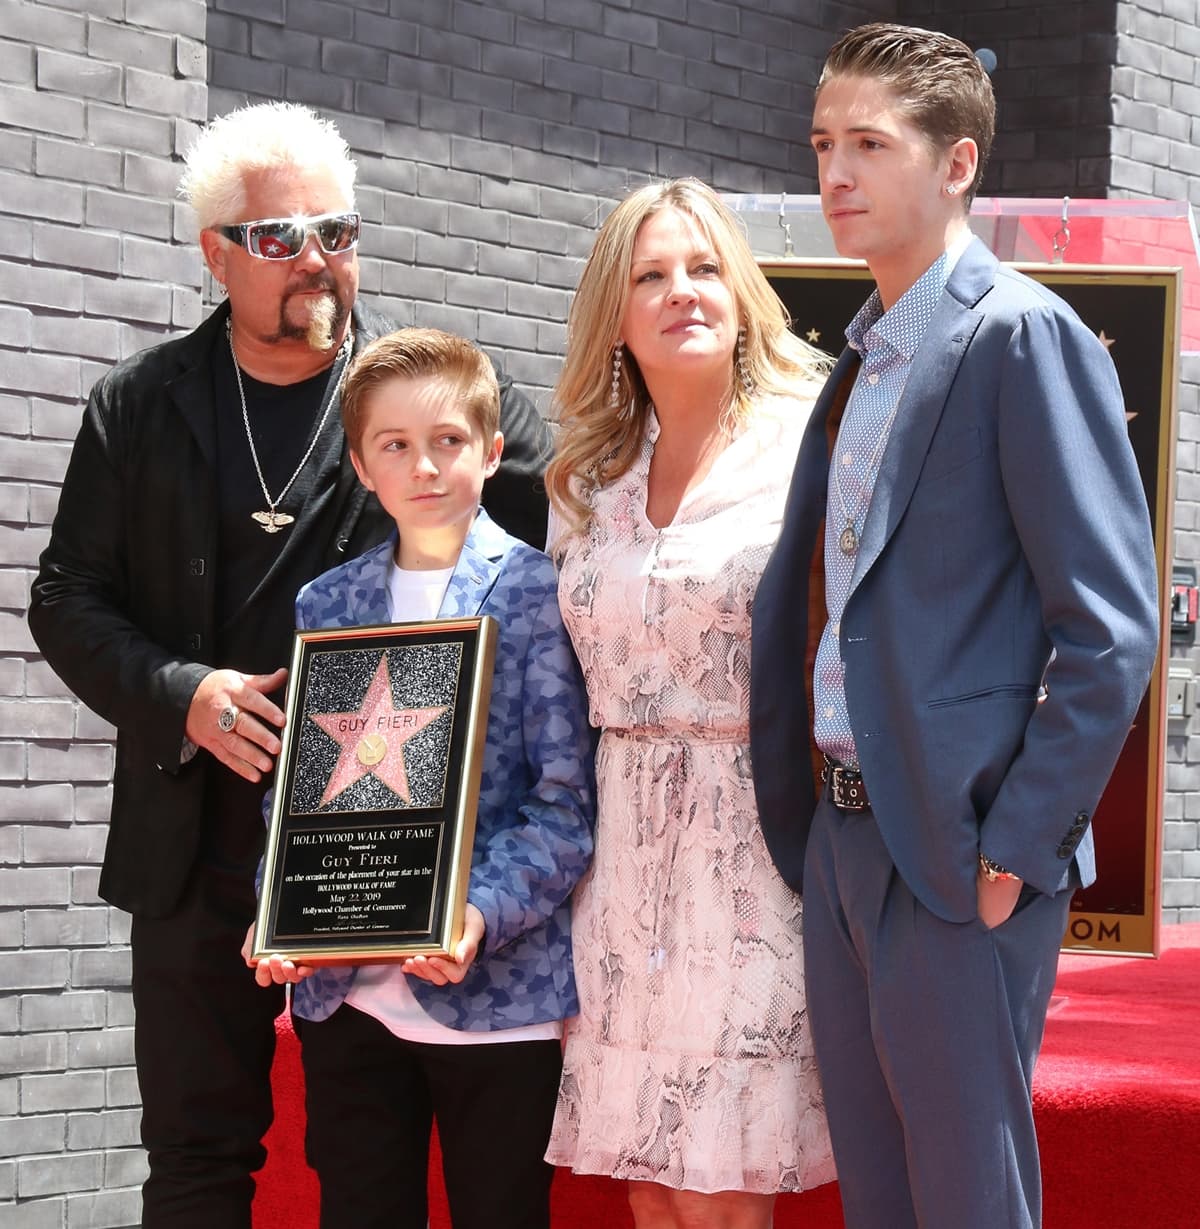 Guy and Lori Fieri met in California in 1992 and share two children, Hunter and Ryder